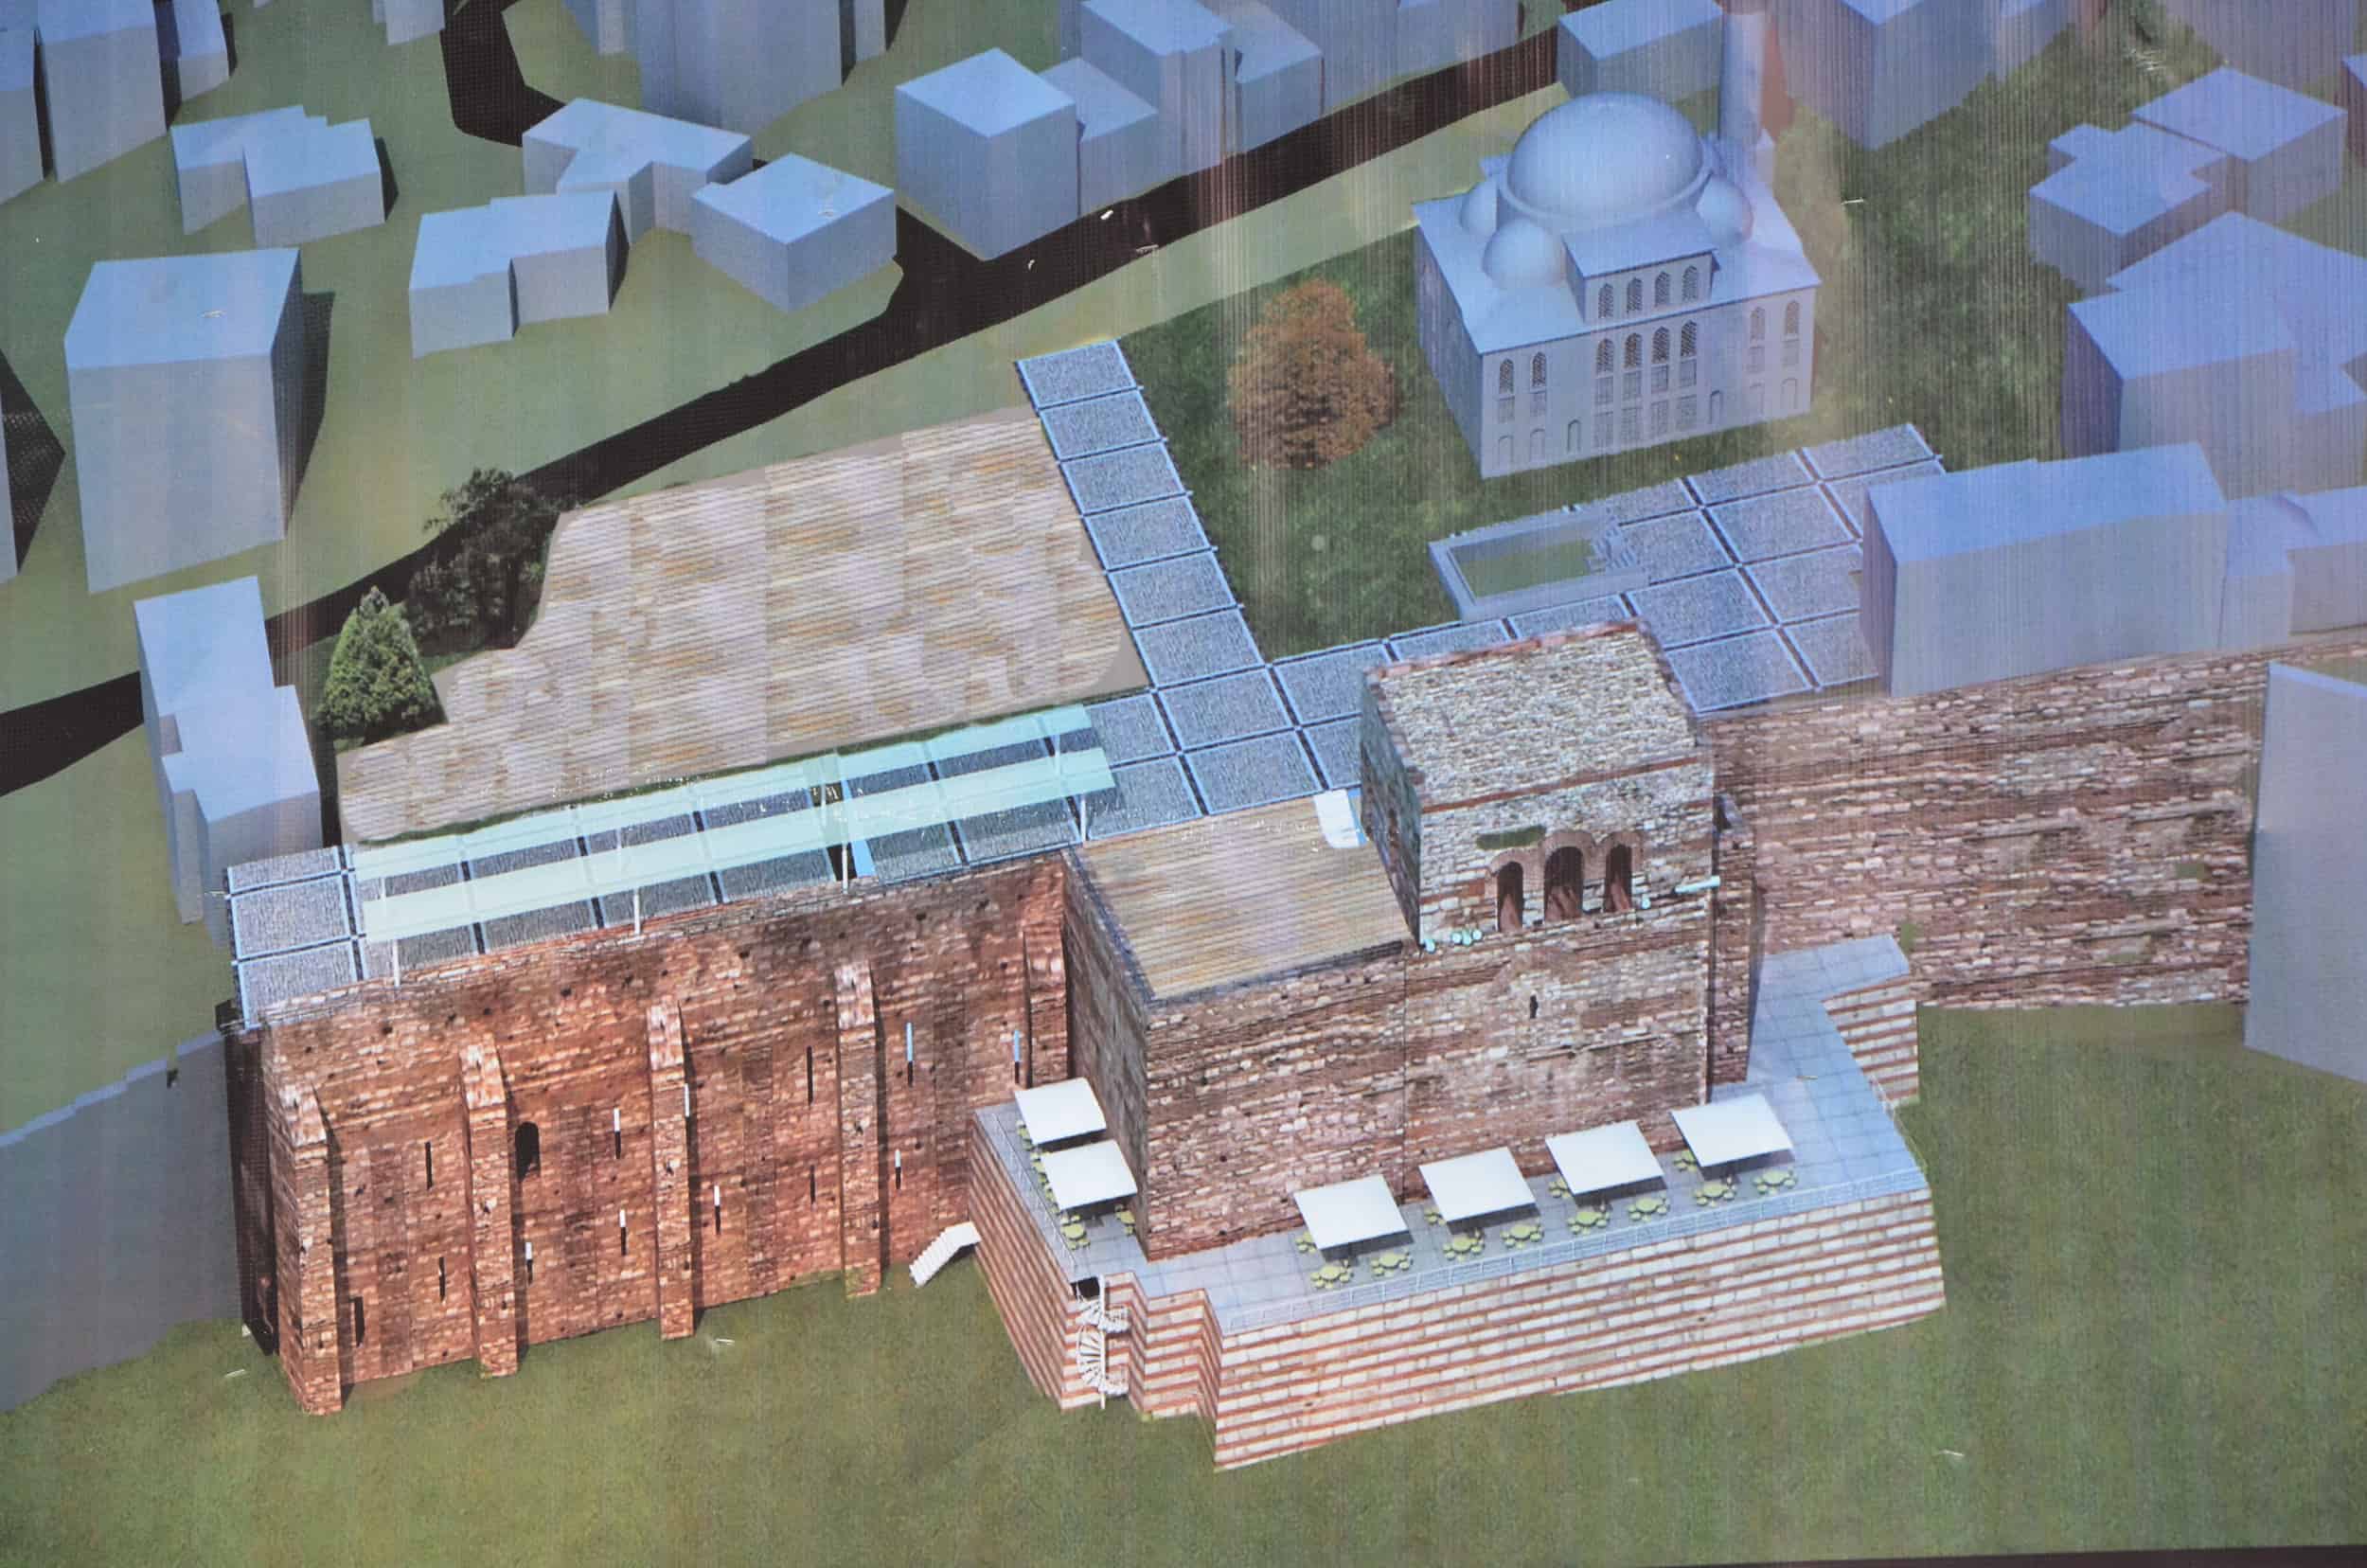 Rendering of the project at the Prison of Anemas on the Walls of Blachernae